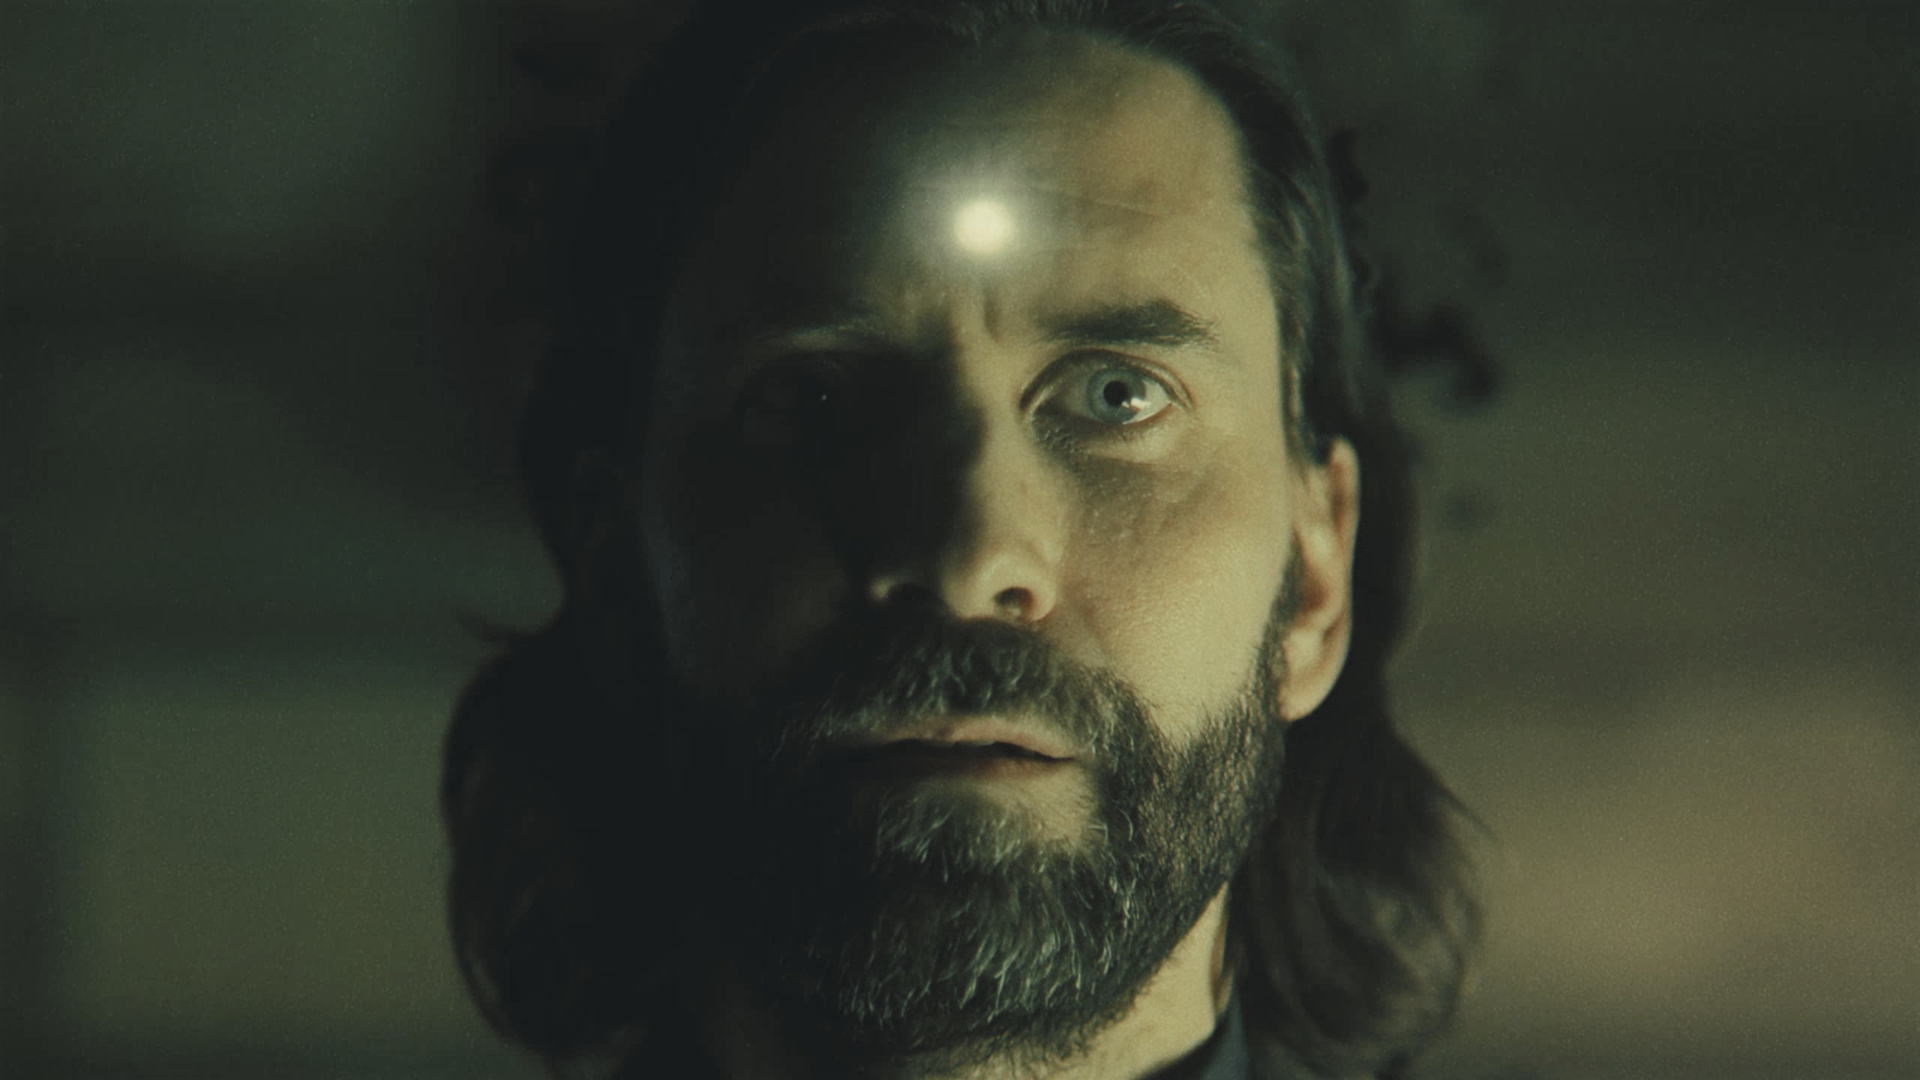 How Alan Wake 2's Live-Action Scenes Make the Dark Place More Terrifying